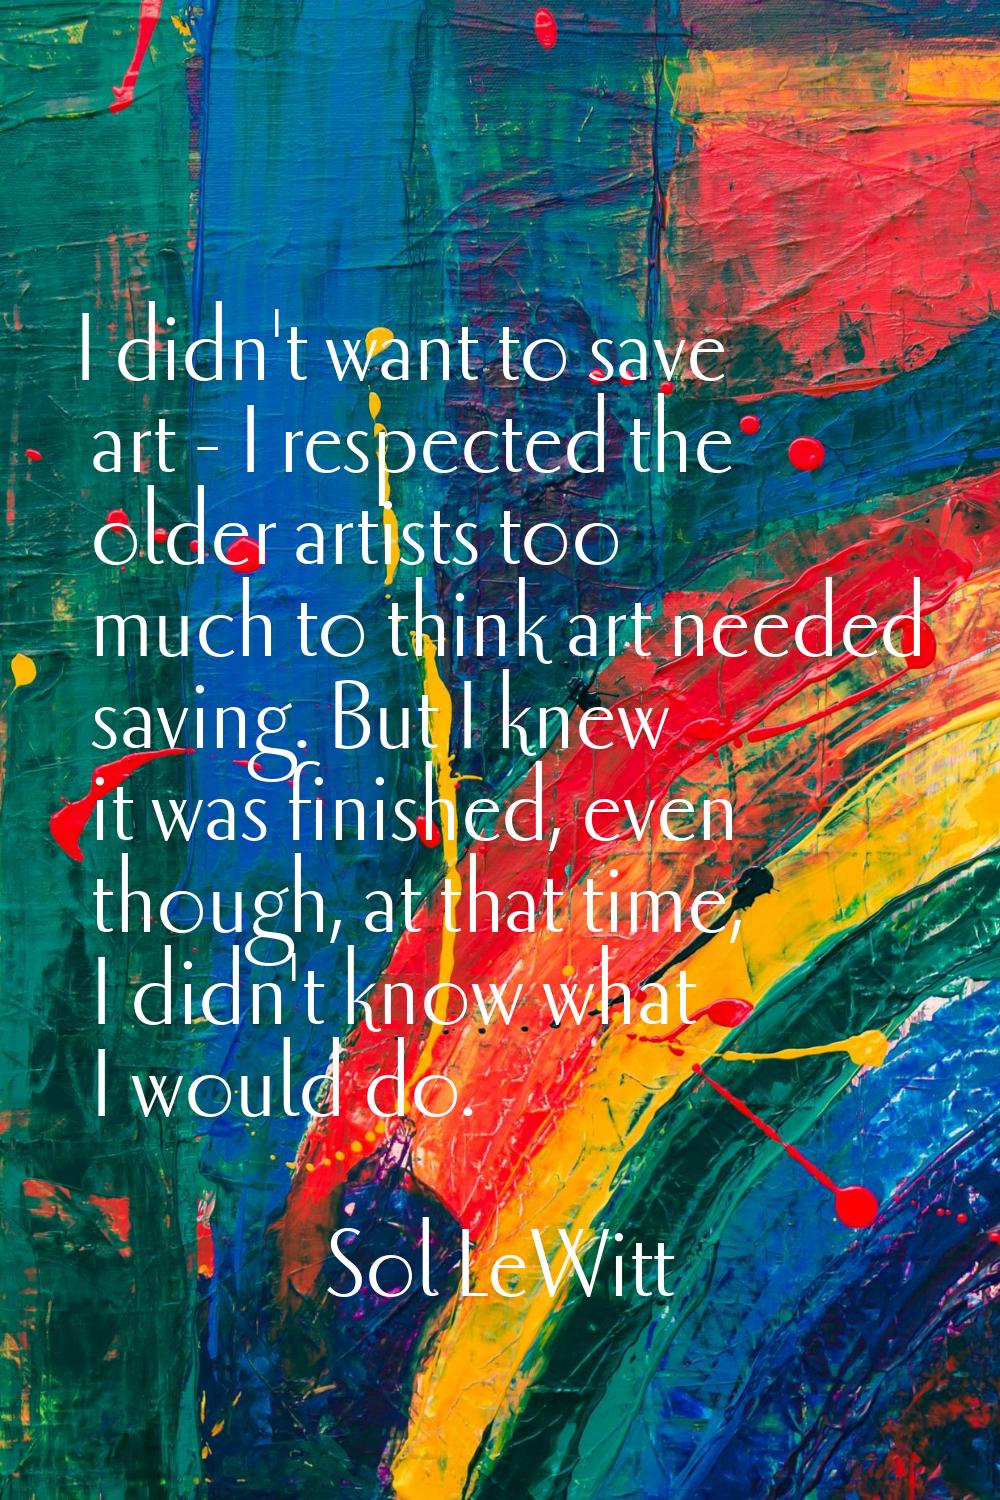 I didn't want to save art - I respected the older artists too much to think art needed saving. But 